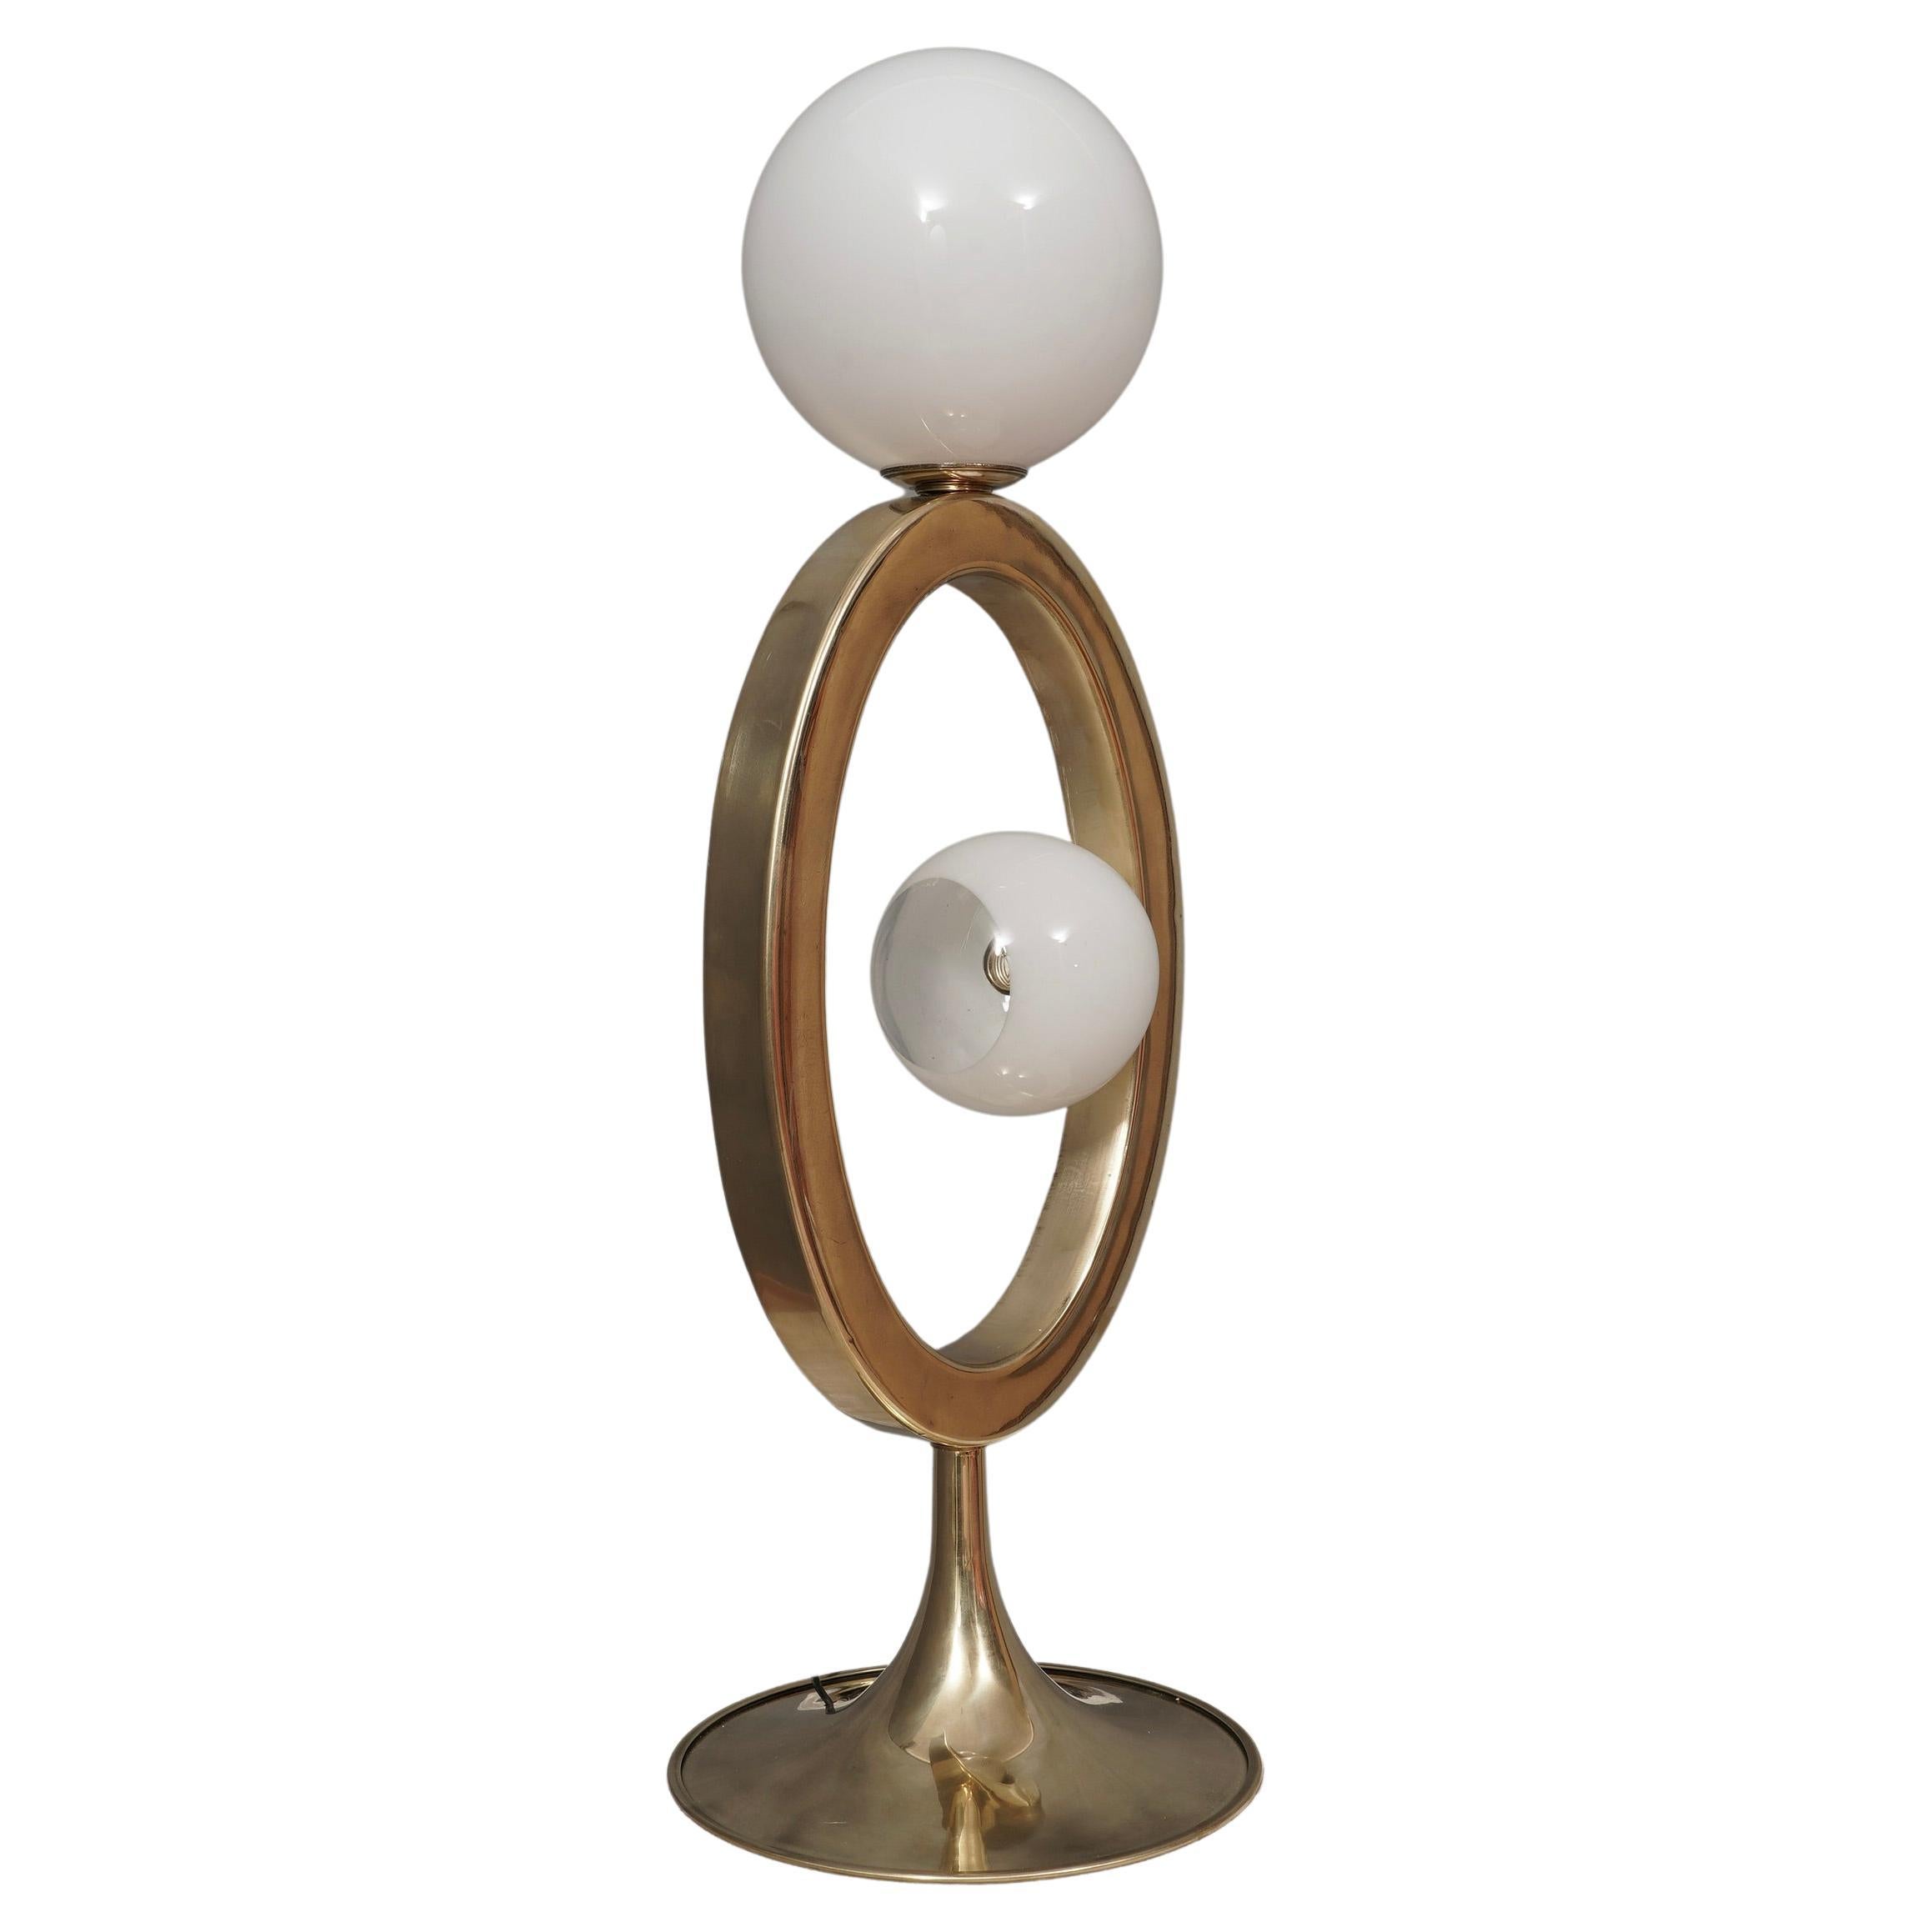 Murano Brass and Glass MidCentury Table Lamp, 1990